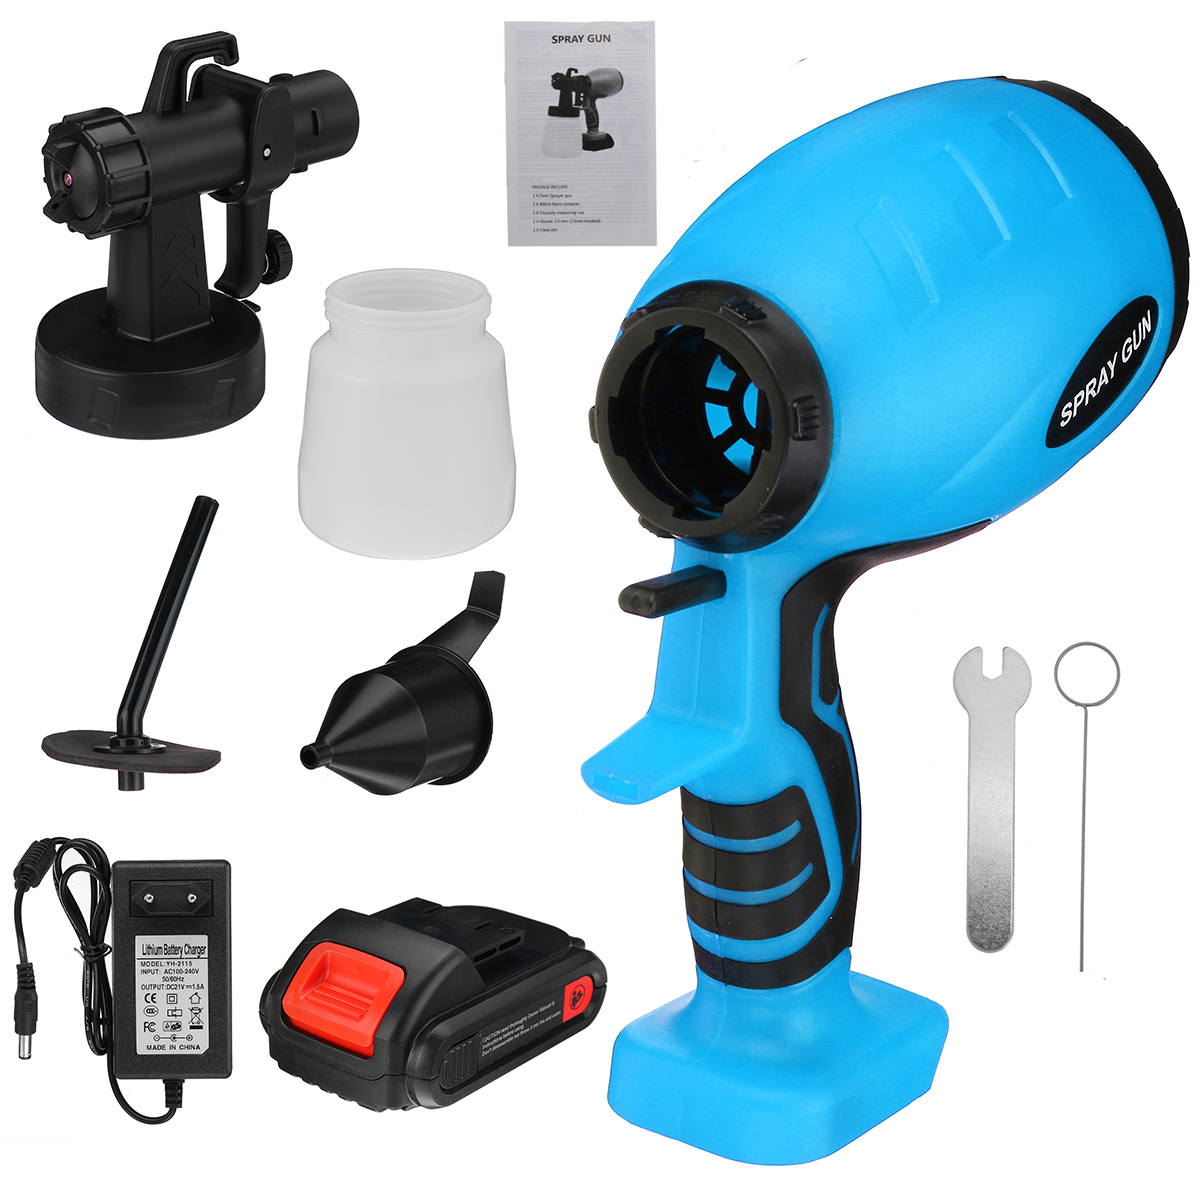 2000mAh-Portable-Electric-Paint-Sprayer-Wireless-Handheld-Spray-Guns-Home-Indoor-Fence-Painting-Tool-1851241-11